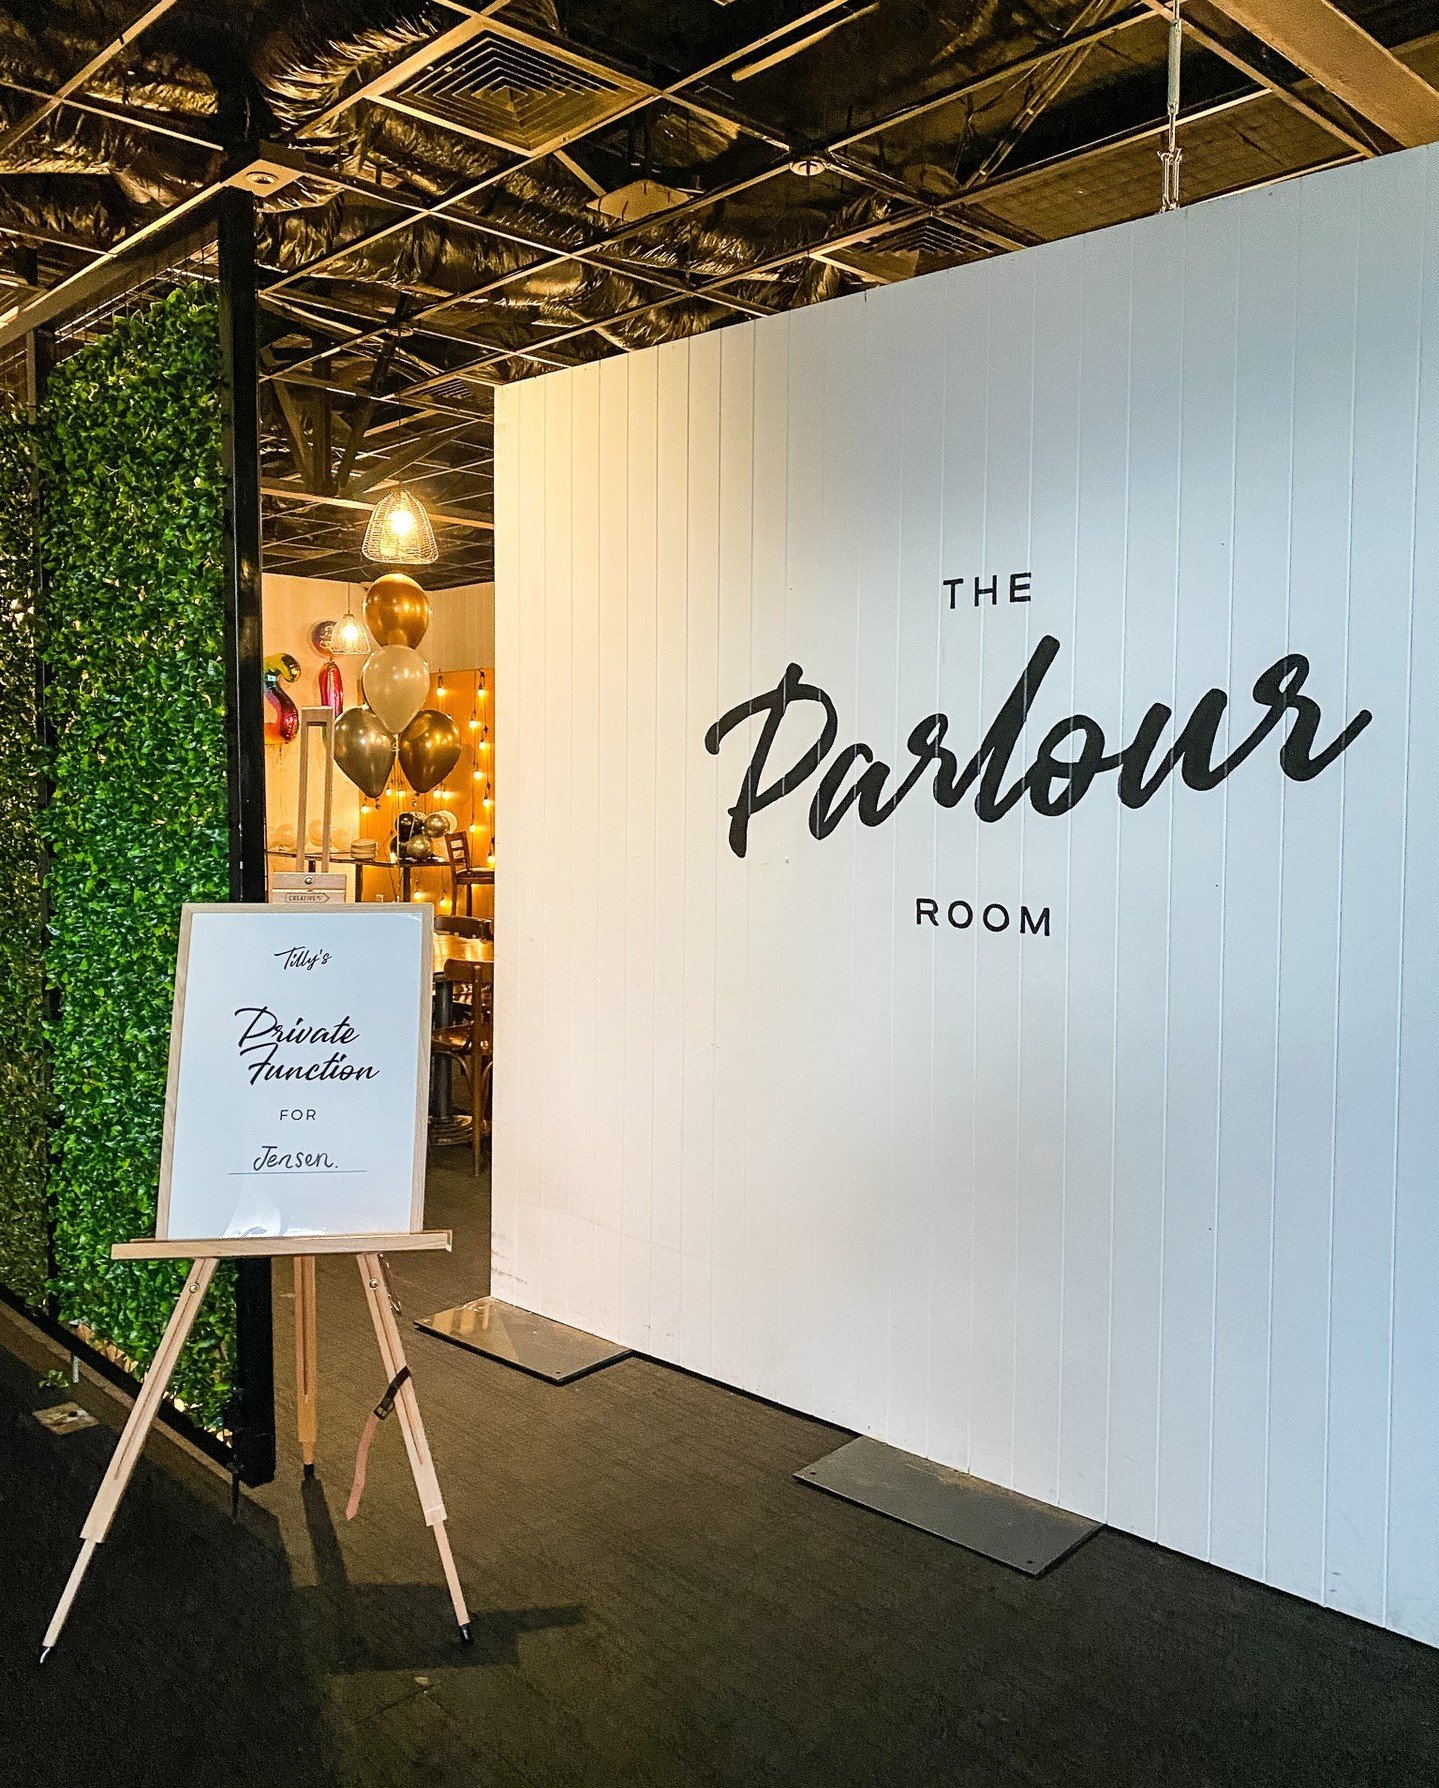 Located on the far side of The Deck, The Parlour Room is the perfect private function space for your next birthday or engagement party.

This space can be booked for casual functions, live music events or as a corporate function such as training days